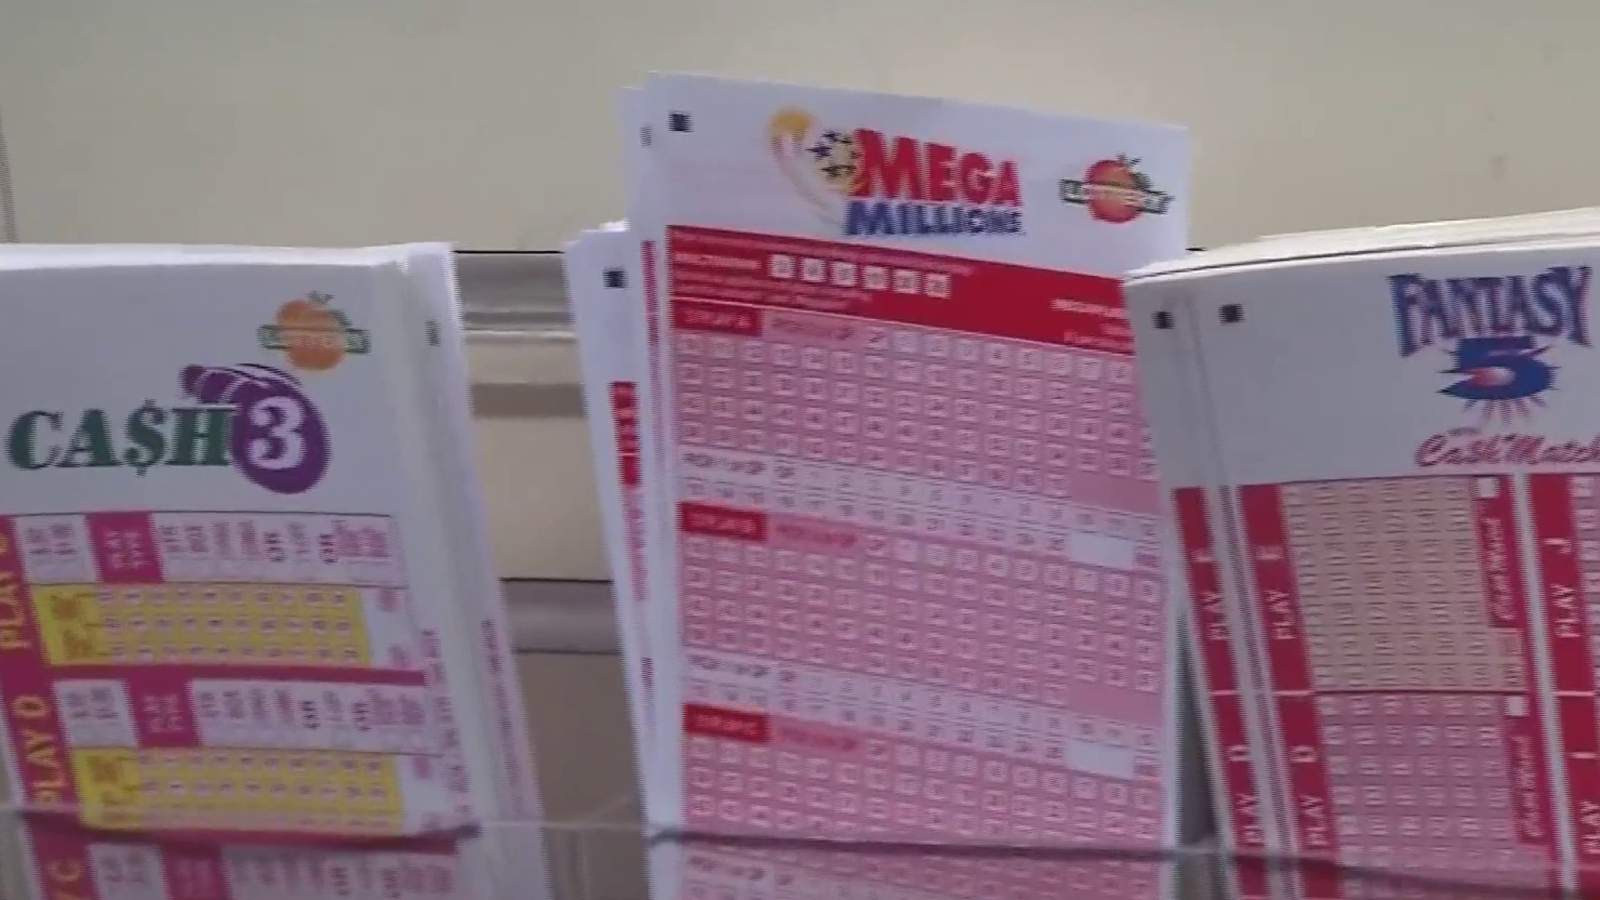 As Mega Millions and Powerball jackpots surge, here’s what to know if you bought a ticket